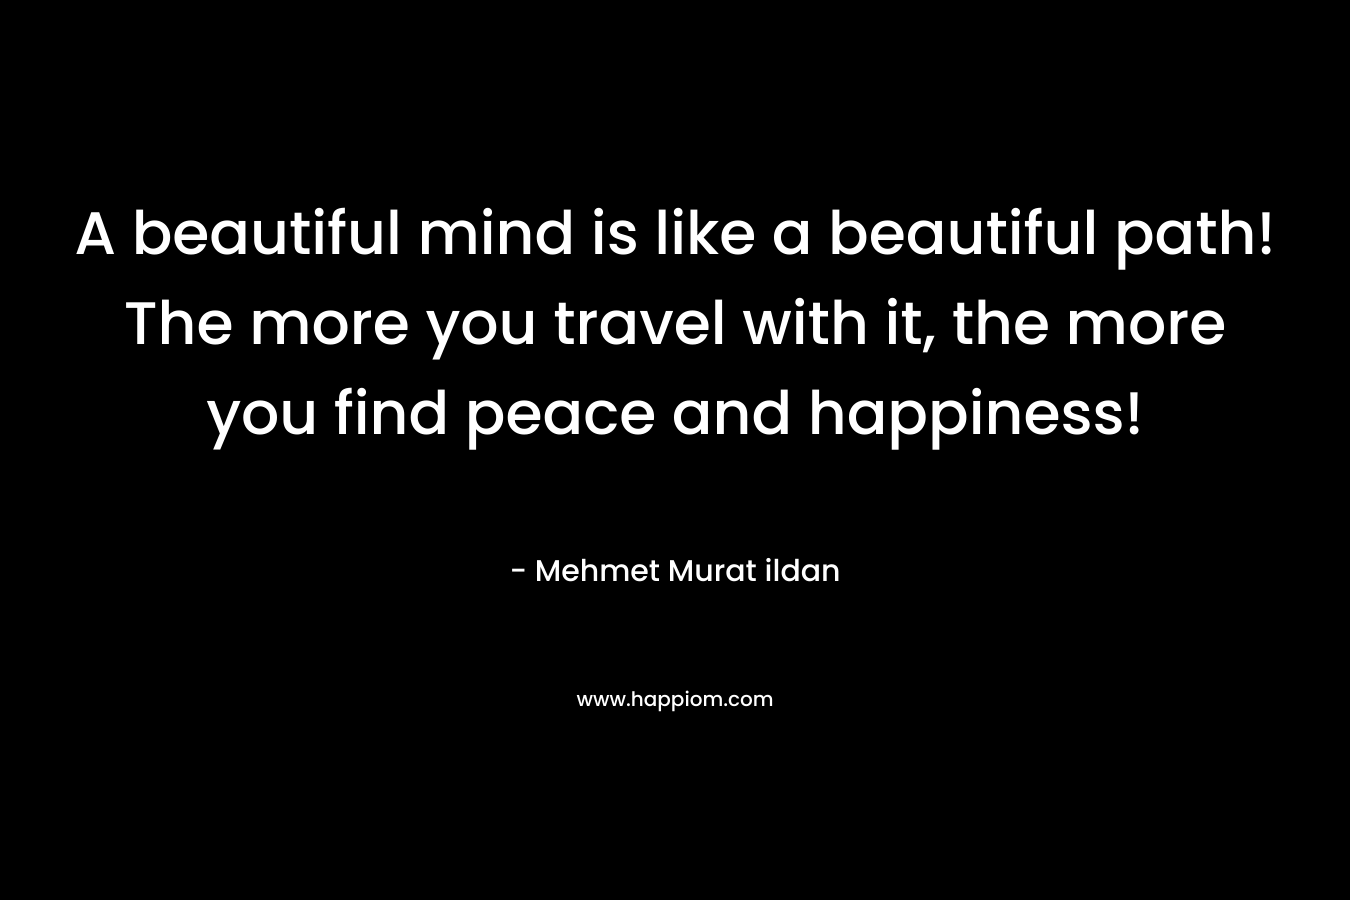 A beautiful mind is like a beautiful path! The more you travel with it, the more you find peace and happiness!